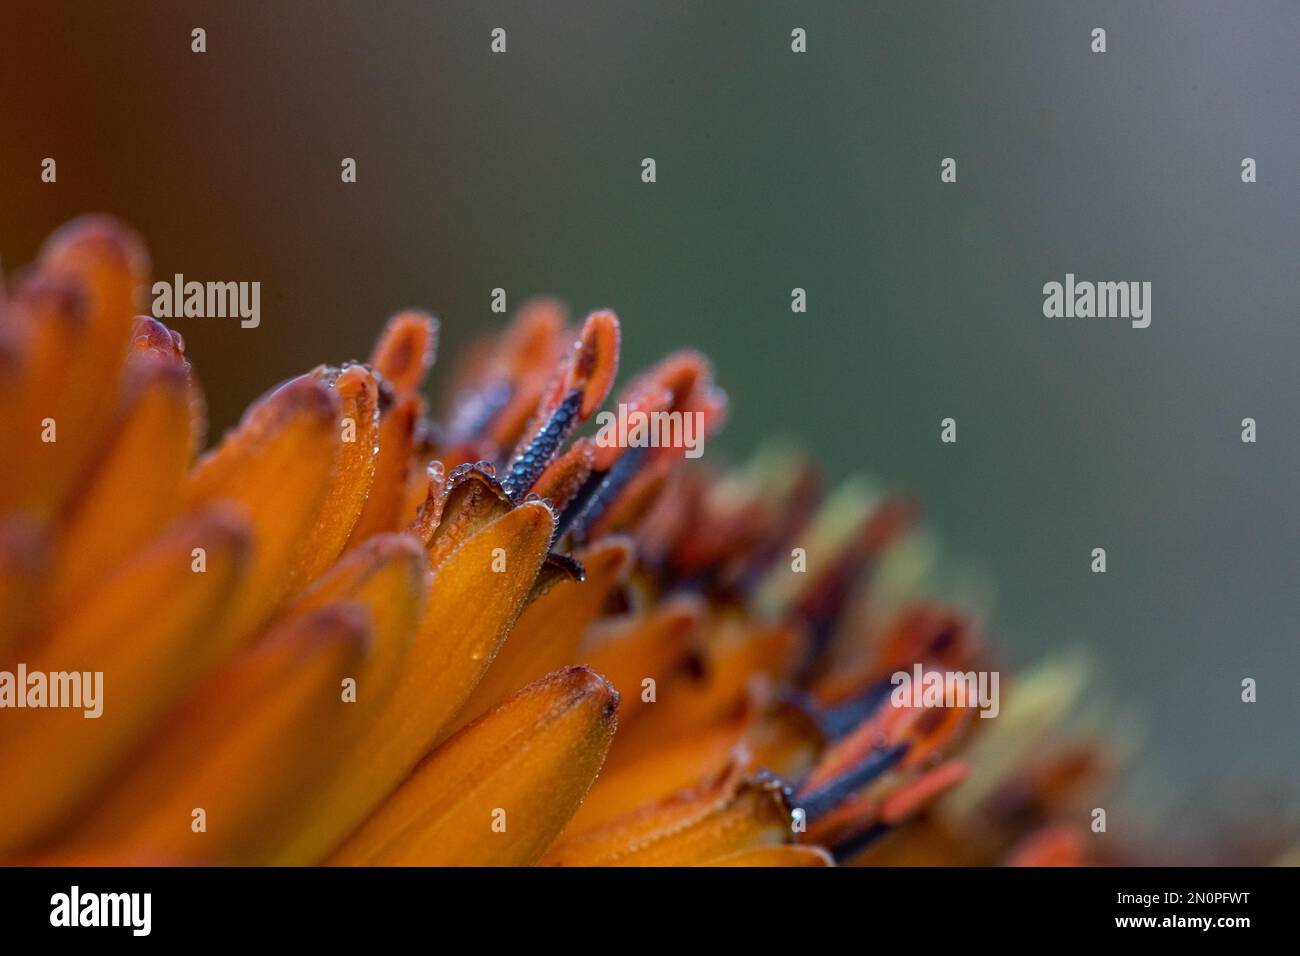 Dew drops on an aloe plant, Aloe maculata, the edge of a yellow leaf and moisture drops on stamens. Stock Photo